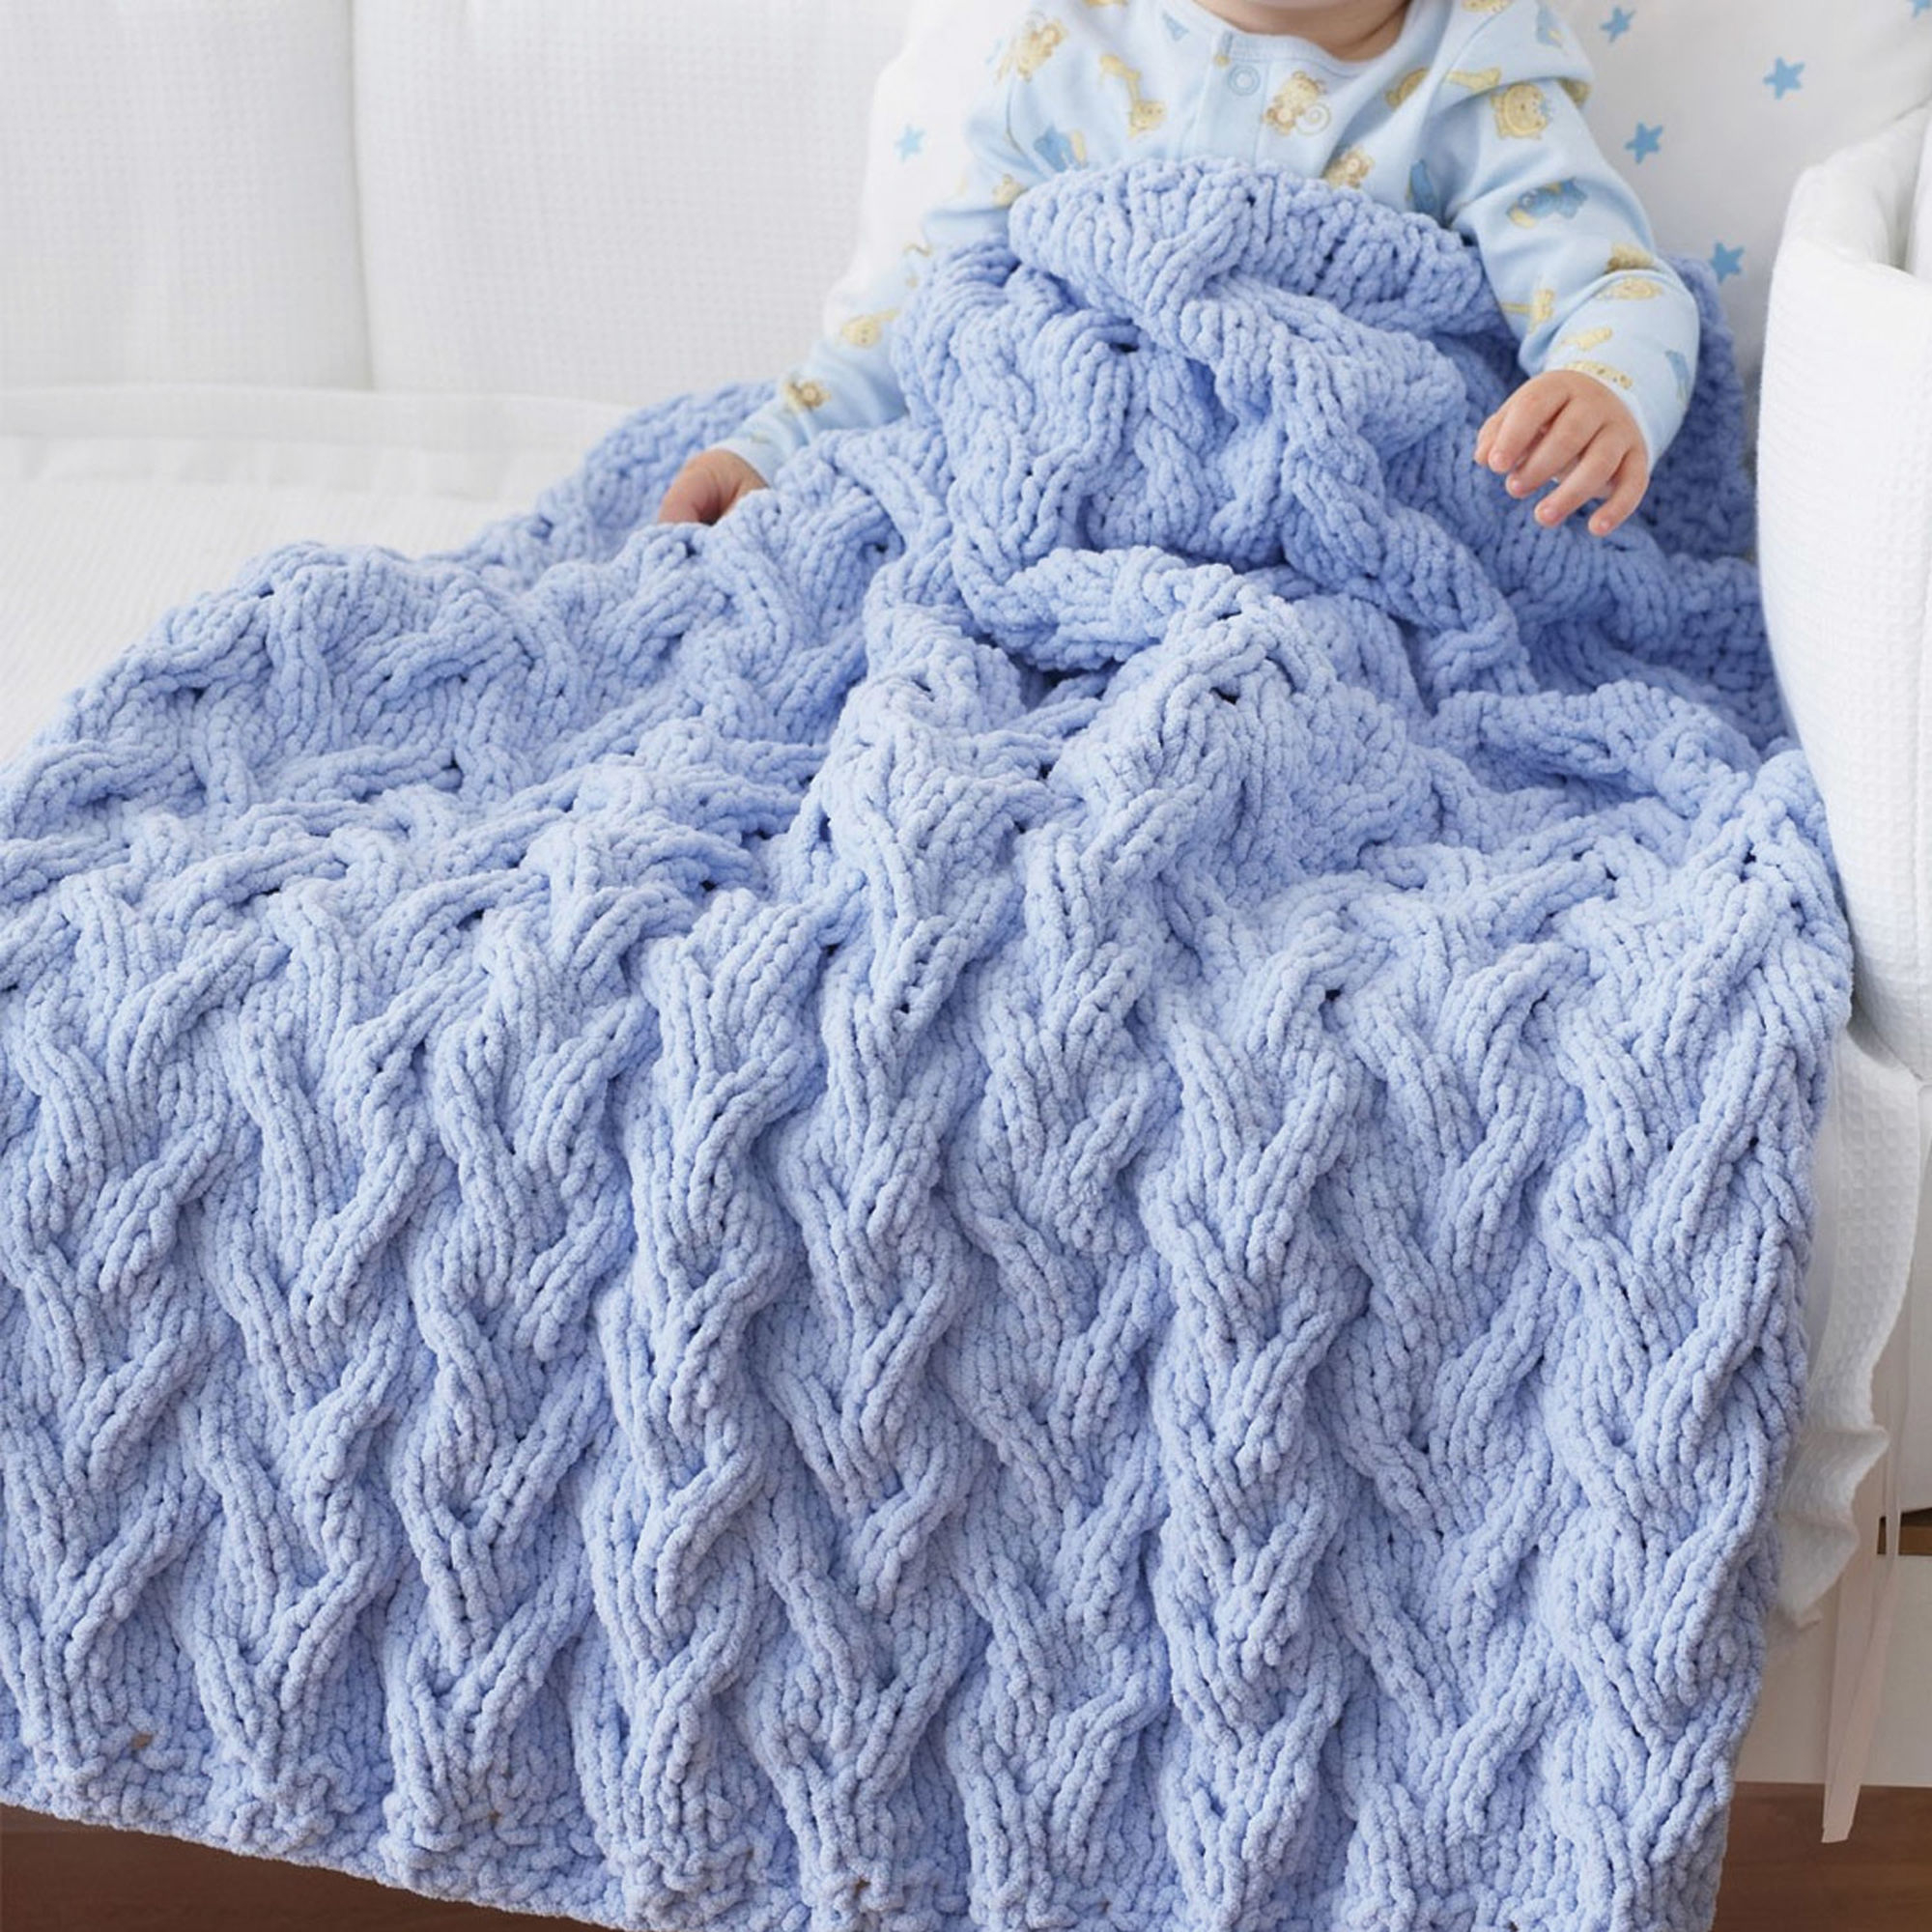 Knitting Patterns Afghans Lovely Cabled Ba Blanket Free Knitting Pattern